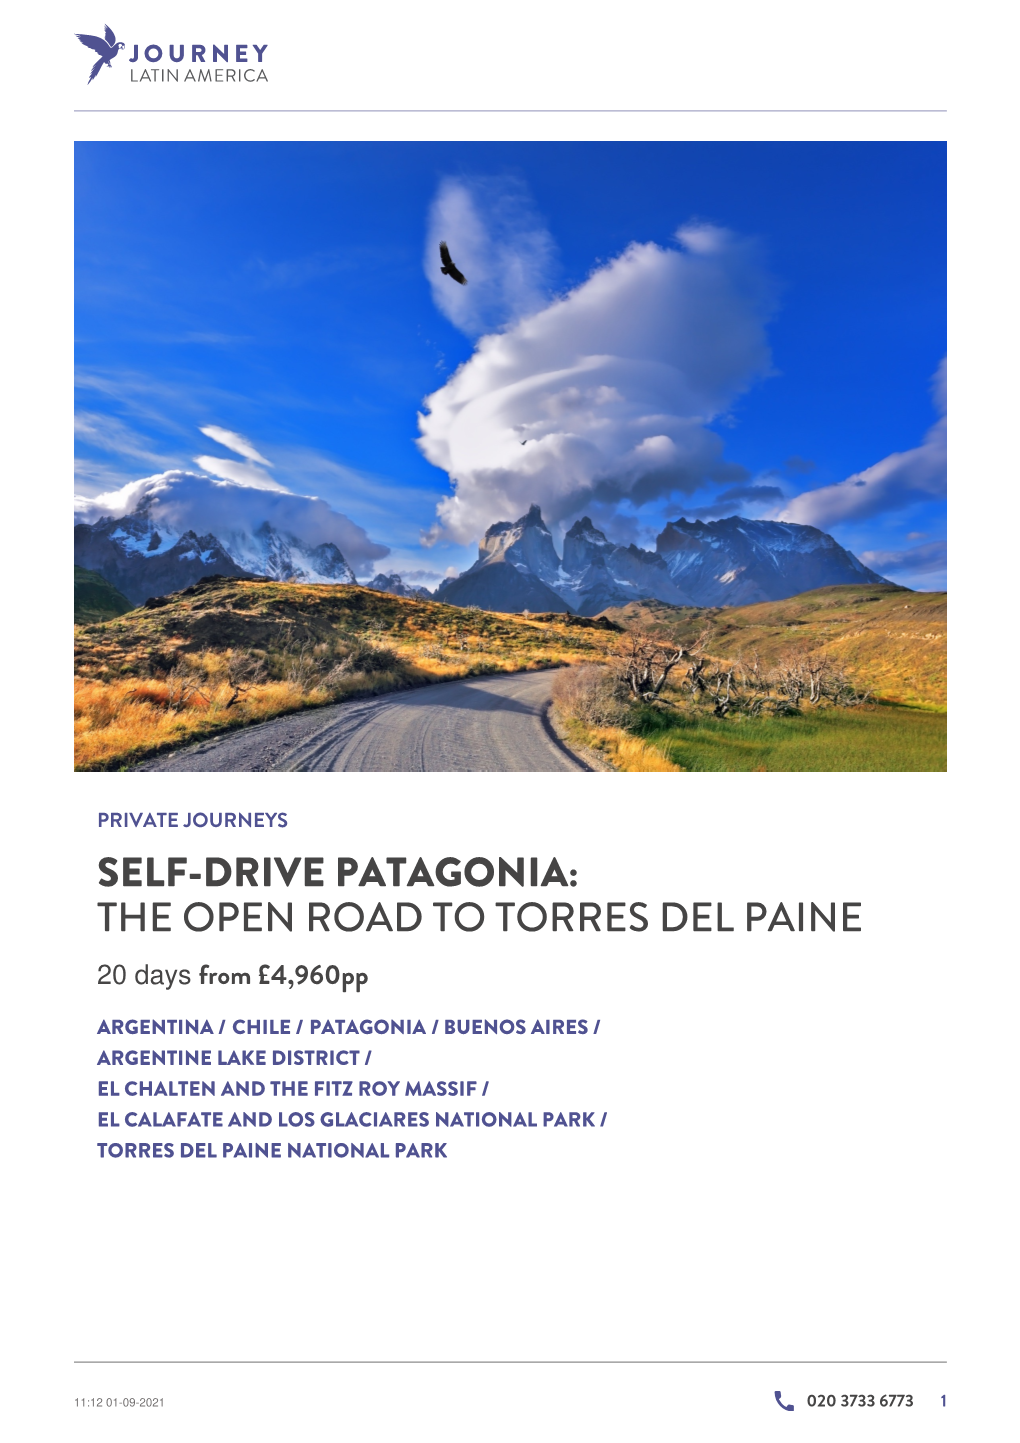 The Open Road to Torres Del Paine